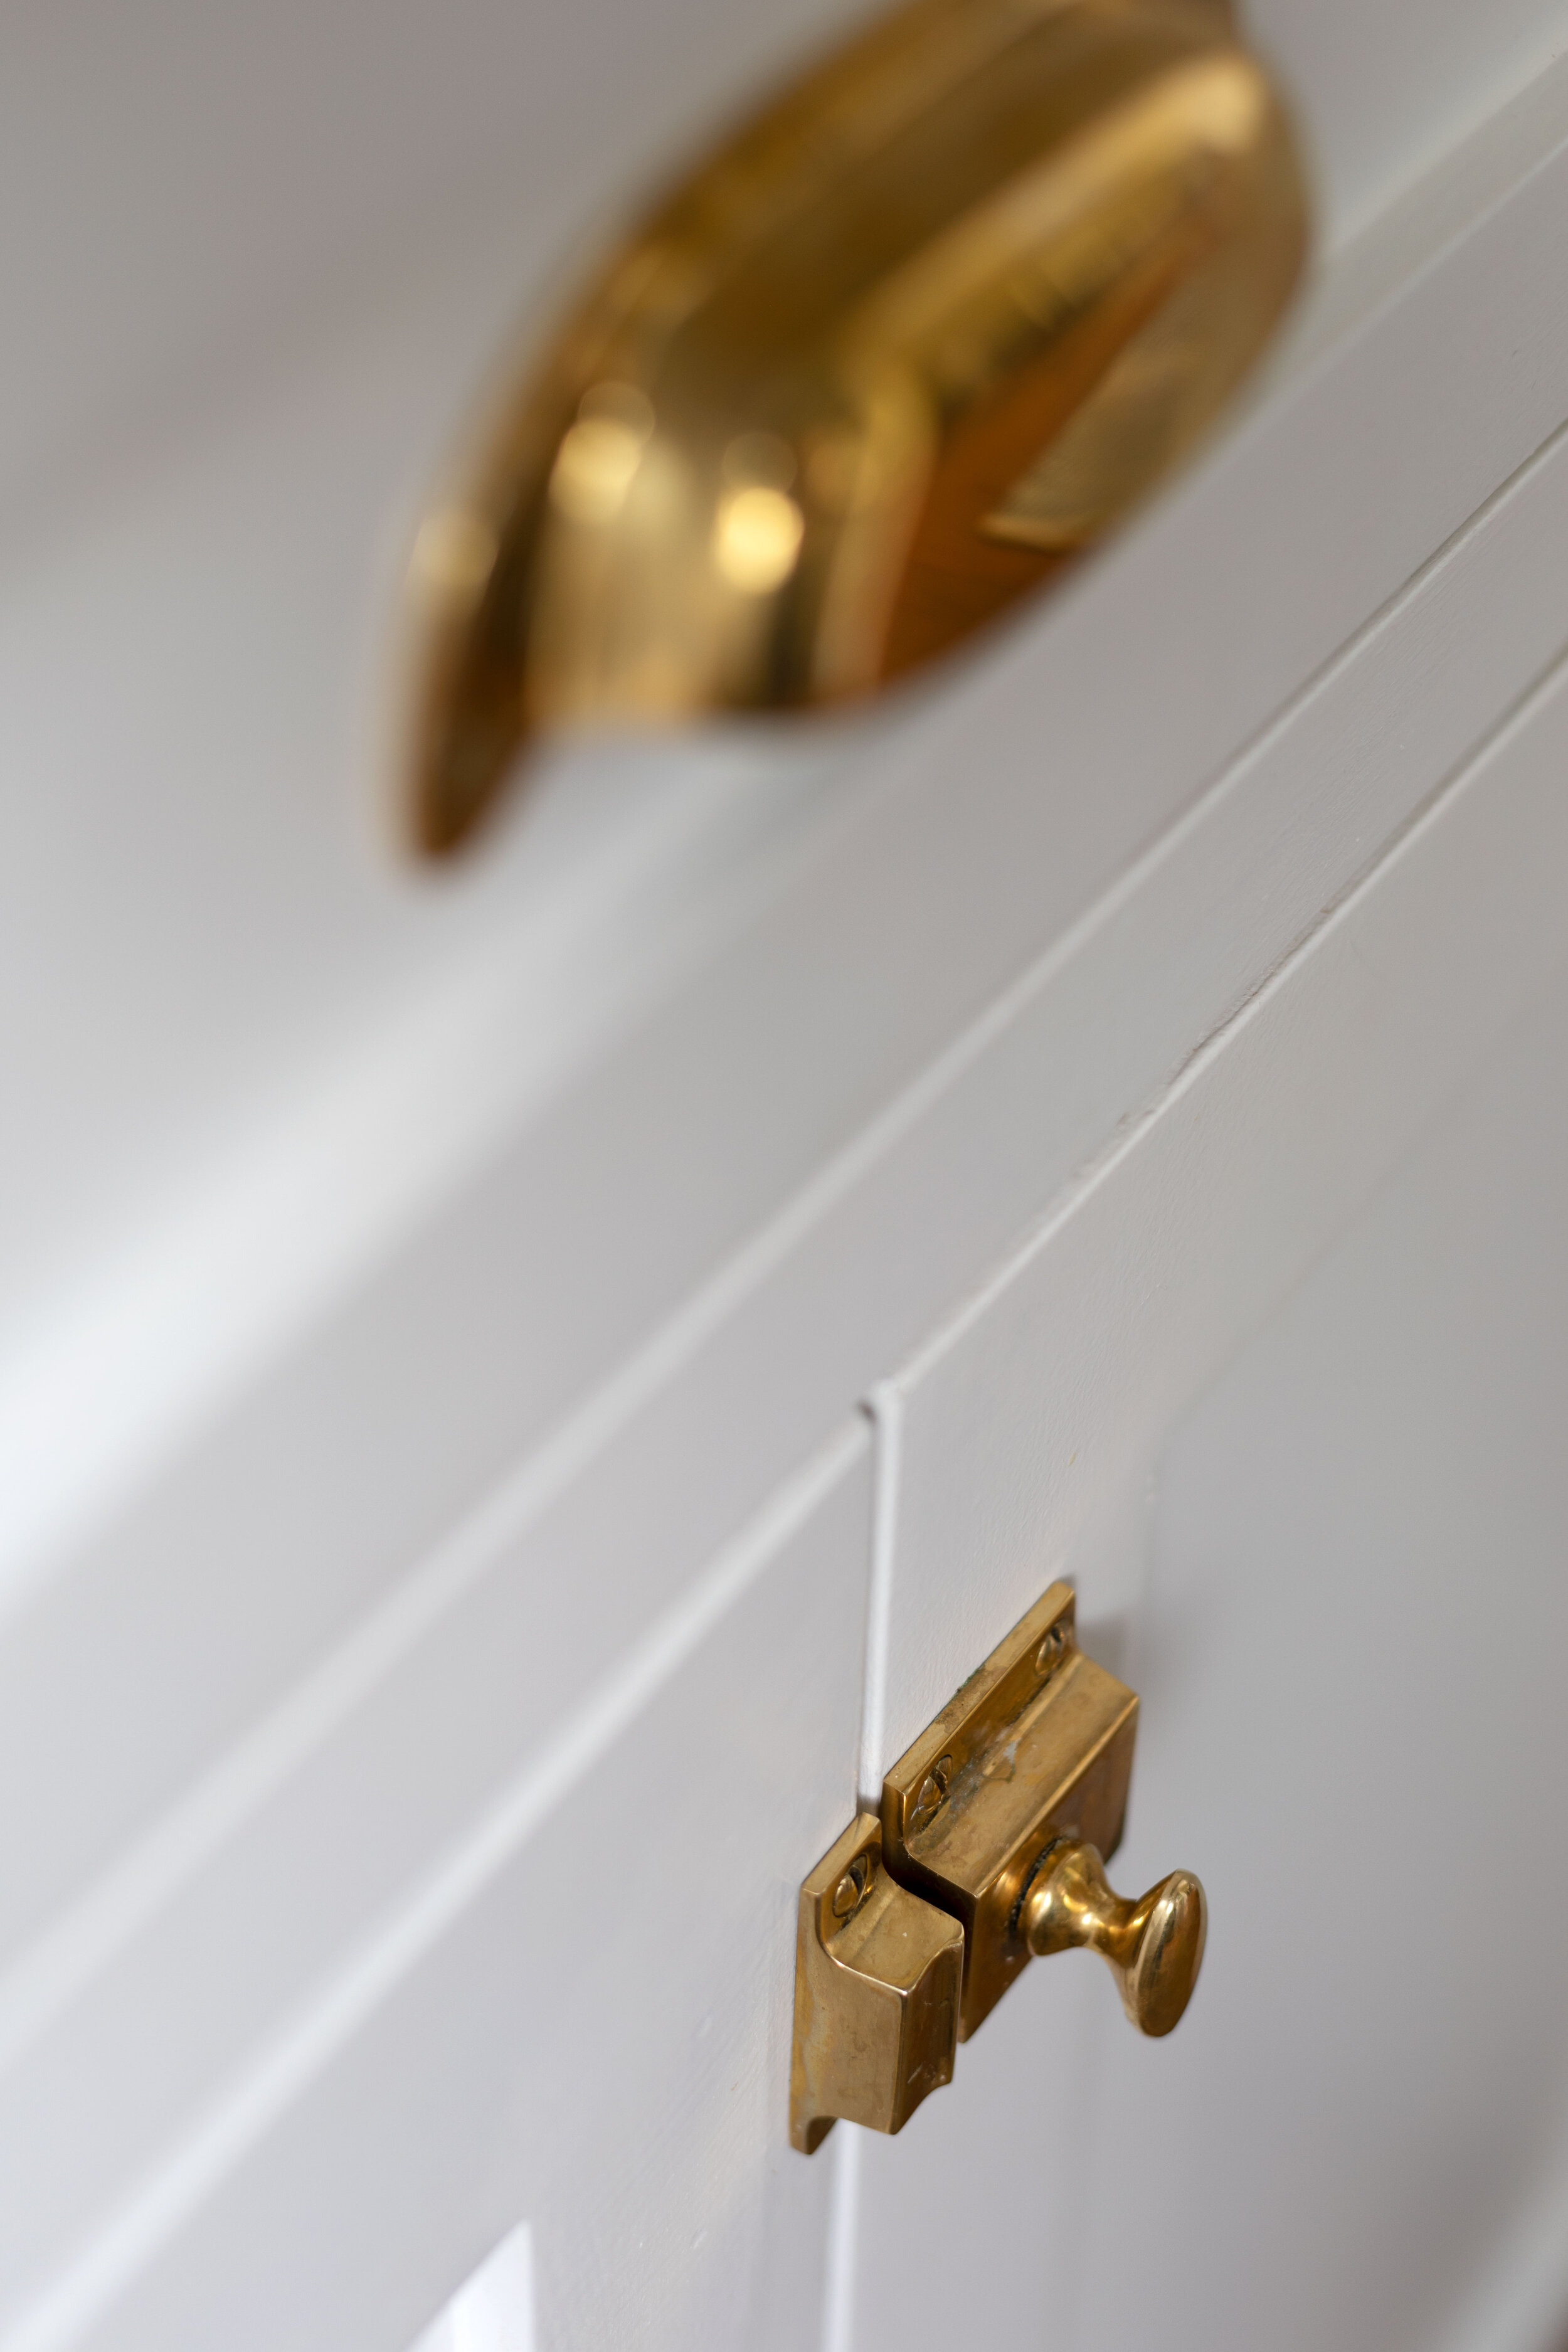 One Year of Age on Our Unlacquered Brass Hardware — The Grit and